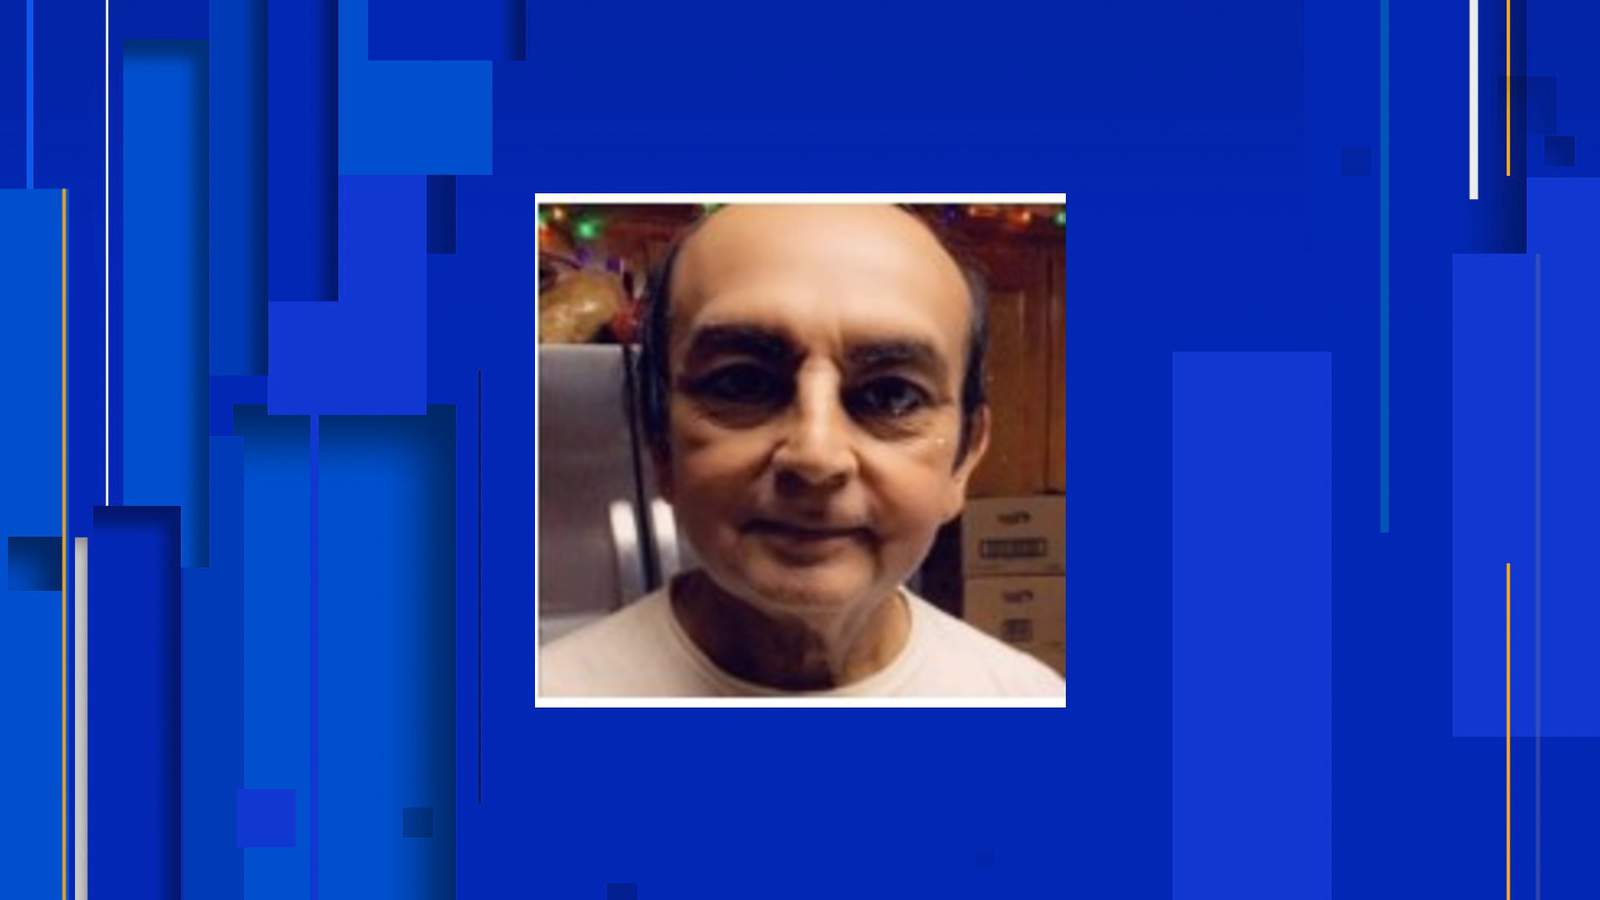 Silver Alert issued for missing San Antonio man, 67